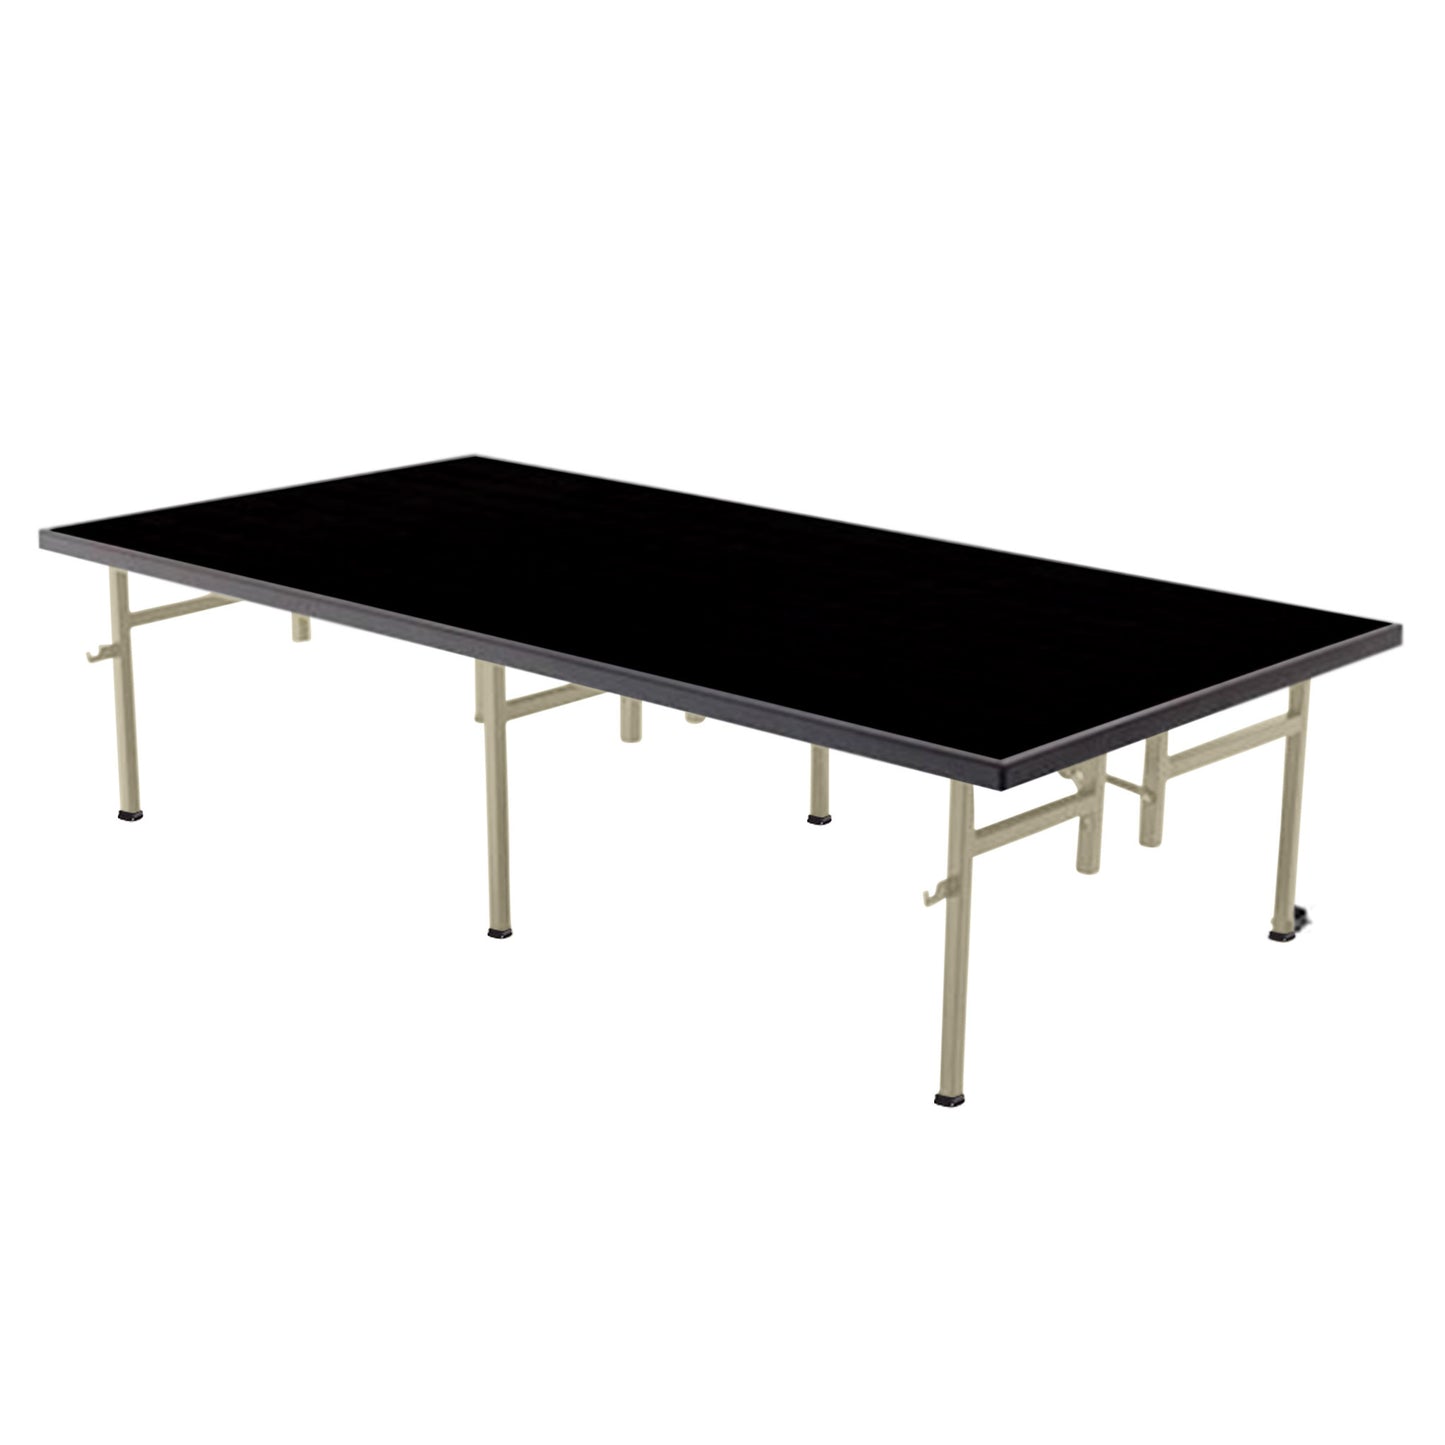 AmTab Fixed Height Stage - Polypropylene Top - 48"W x 48"L x 16"H  (AmTab AMT-ST4416P)